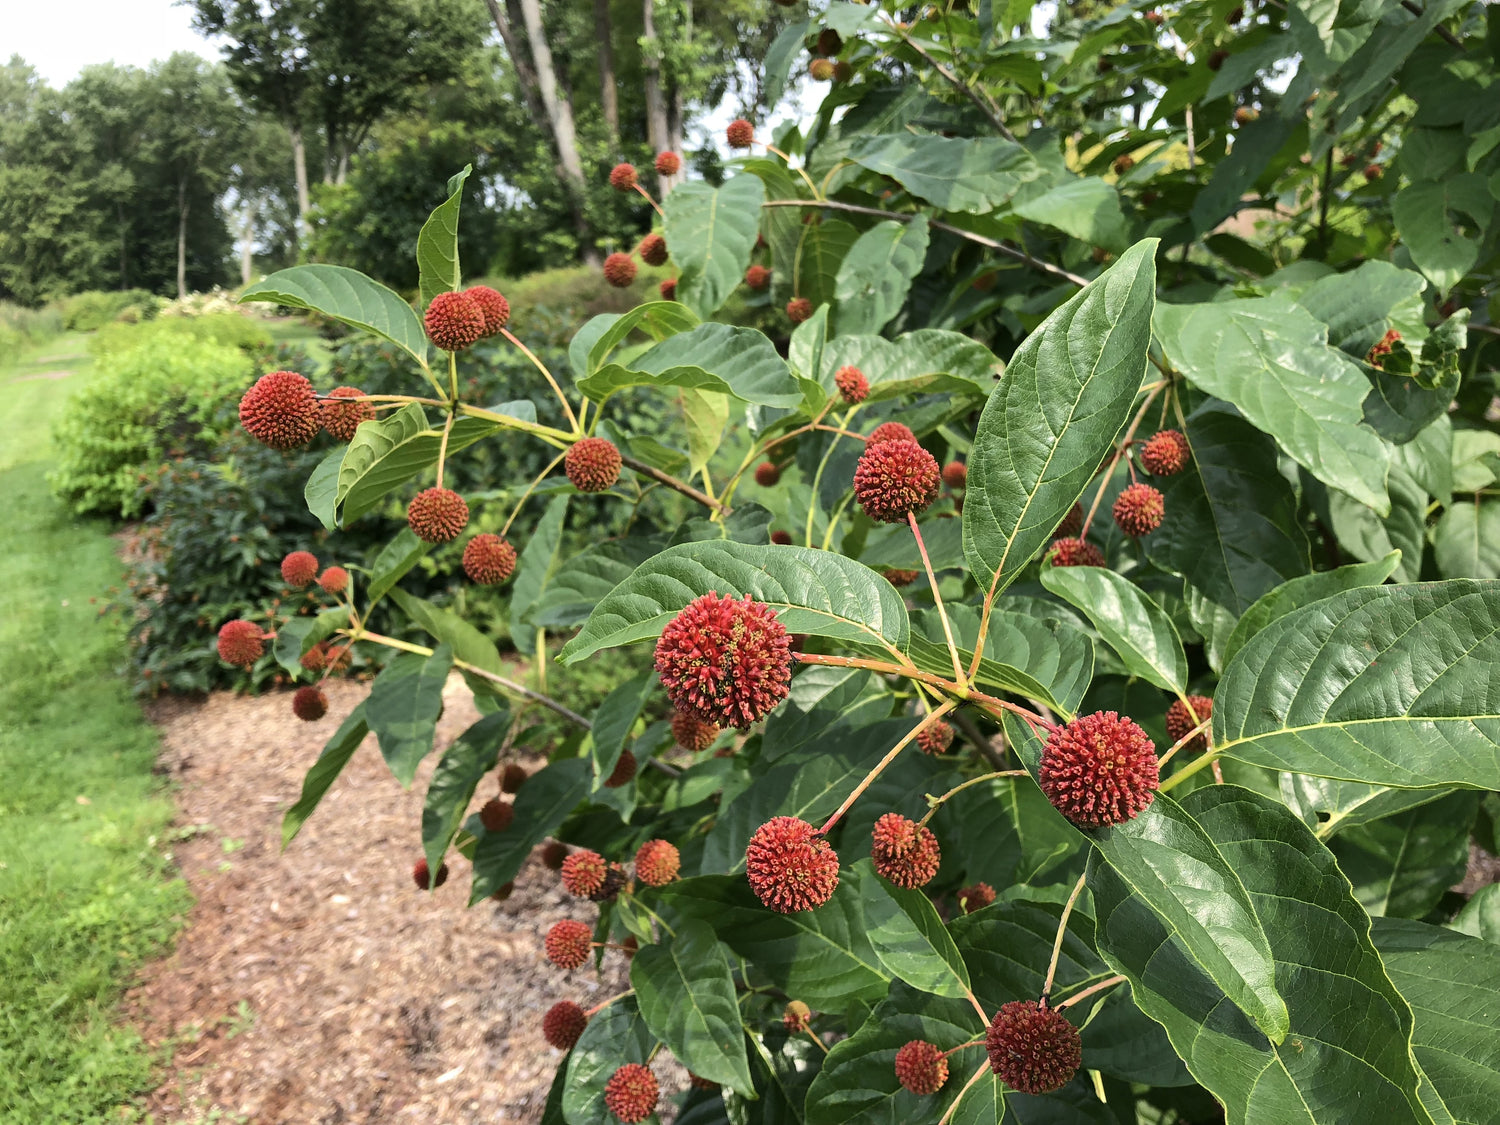 The persistent red fruits of Sugar Shack buttonbush